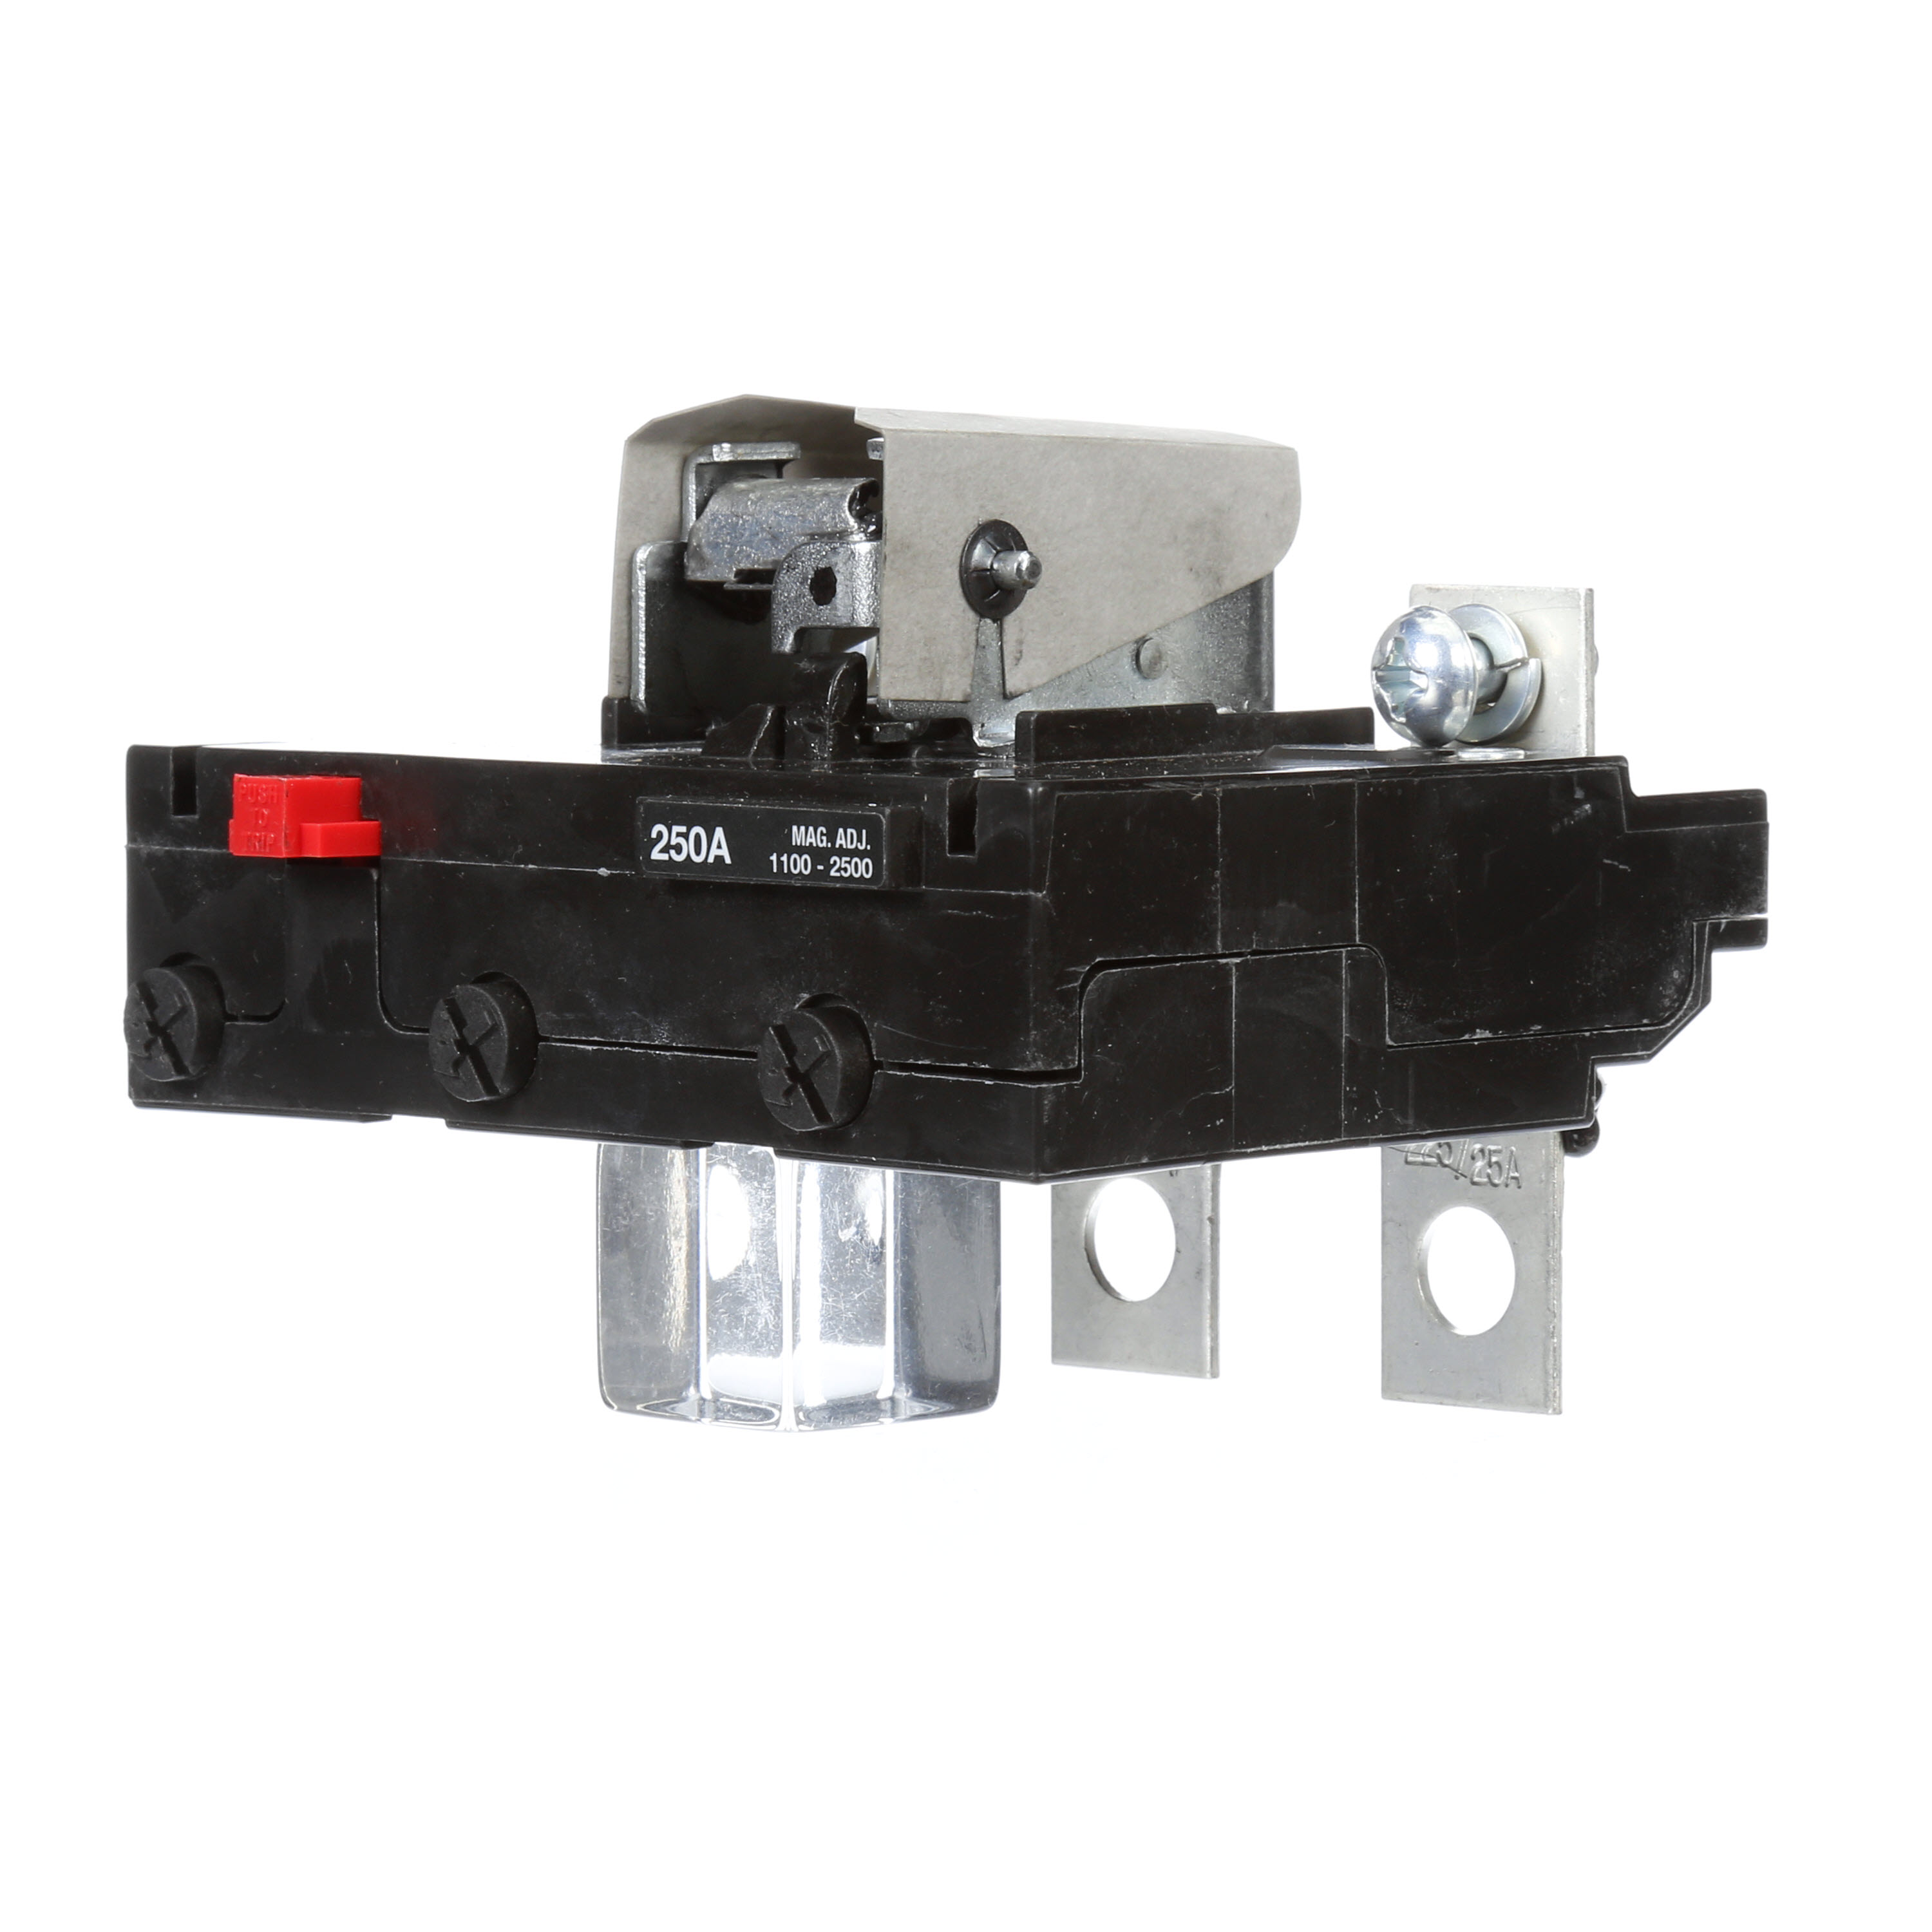 SIEMENS LOW VOLTAGE SENTRON MOLDED CASE CIRCUIT BREAKER. THERMAL - MAGNETIC TRIP UNIT FOR FD FRAME 250A 3-POLE 600V BREAKERS.